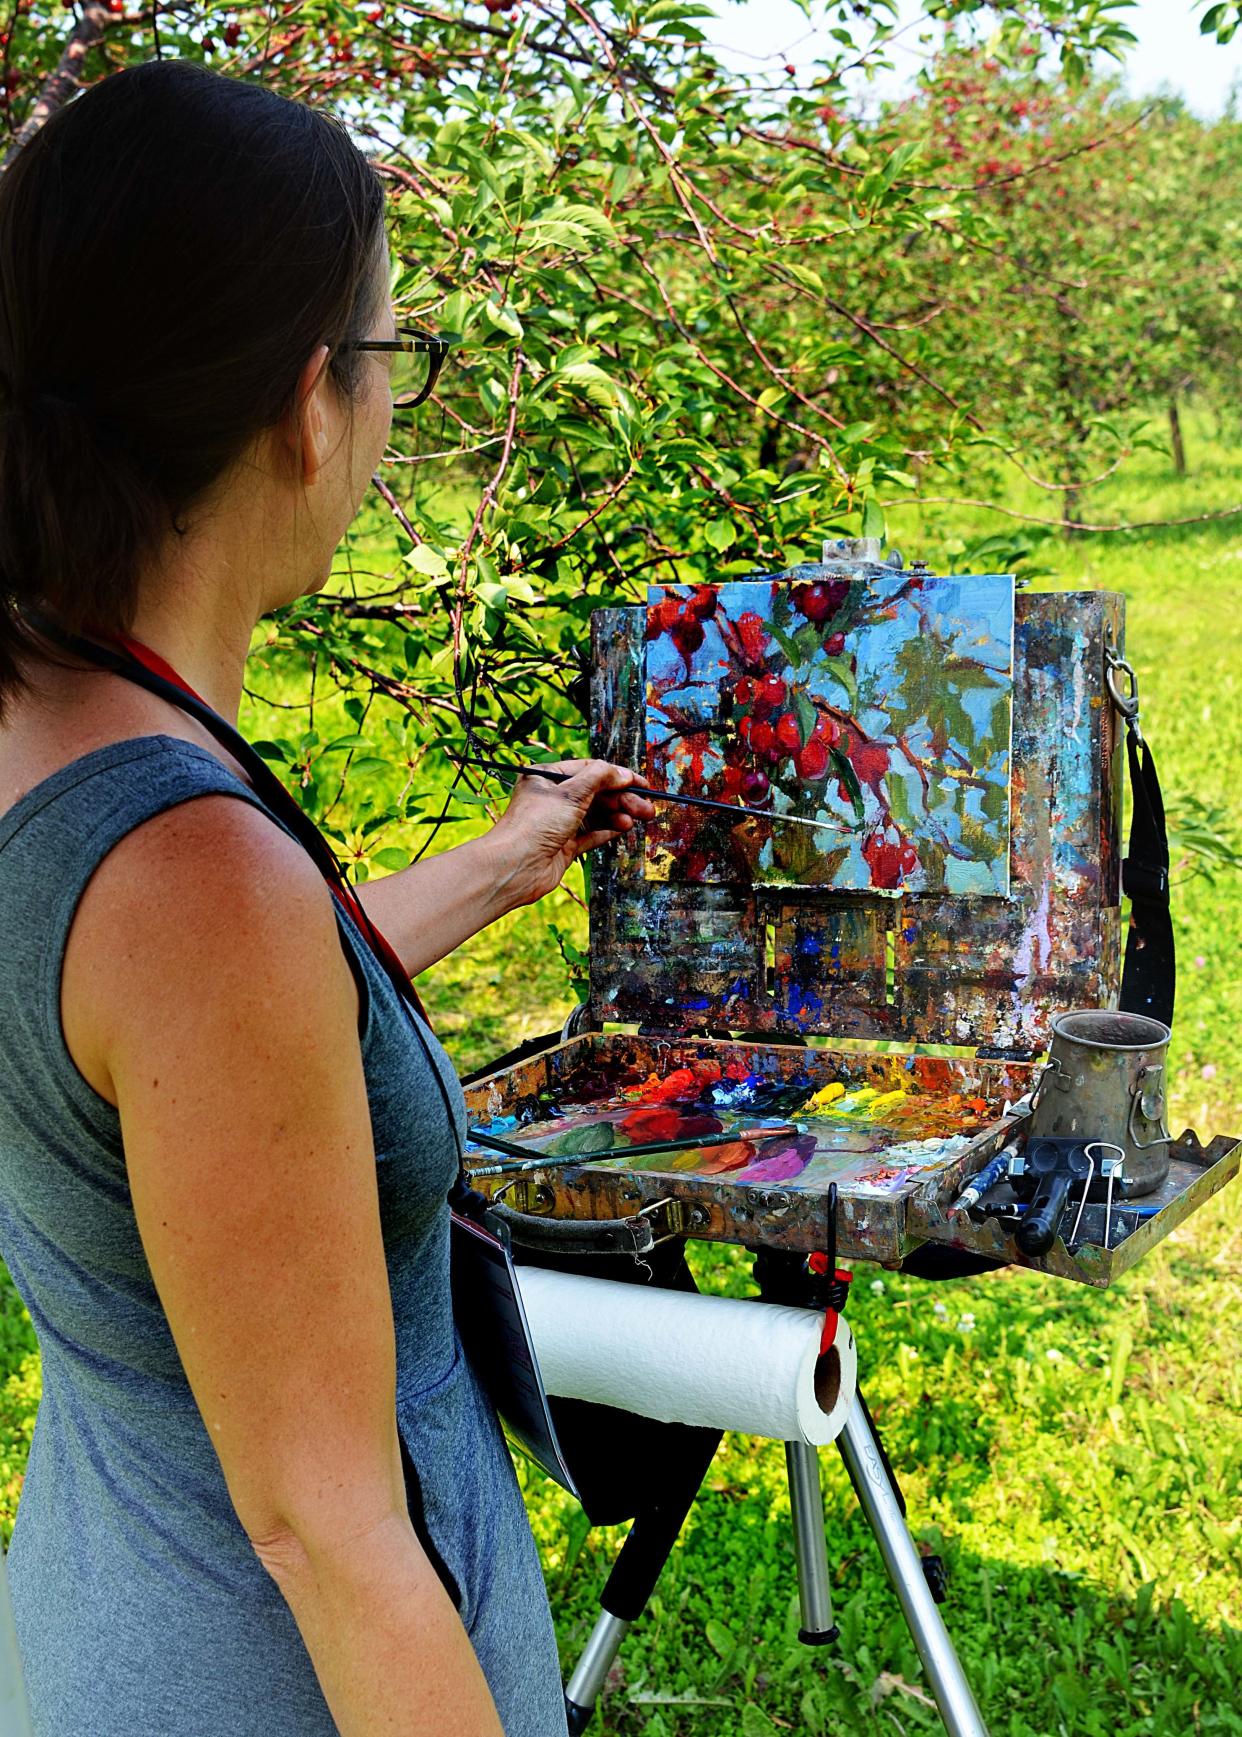 Suzie Baker of Texas visits a cherry orchard at Lautenbach's Orchard Country in Fish Creek to paint a scene during the 2021 Door County Plein Air Festival. Baker is one of 35 artists who will be in various locations around the Peninsula to paint what they see in front of them during the 2022 festival, which runs from July 24 to 30.